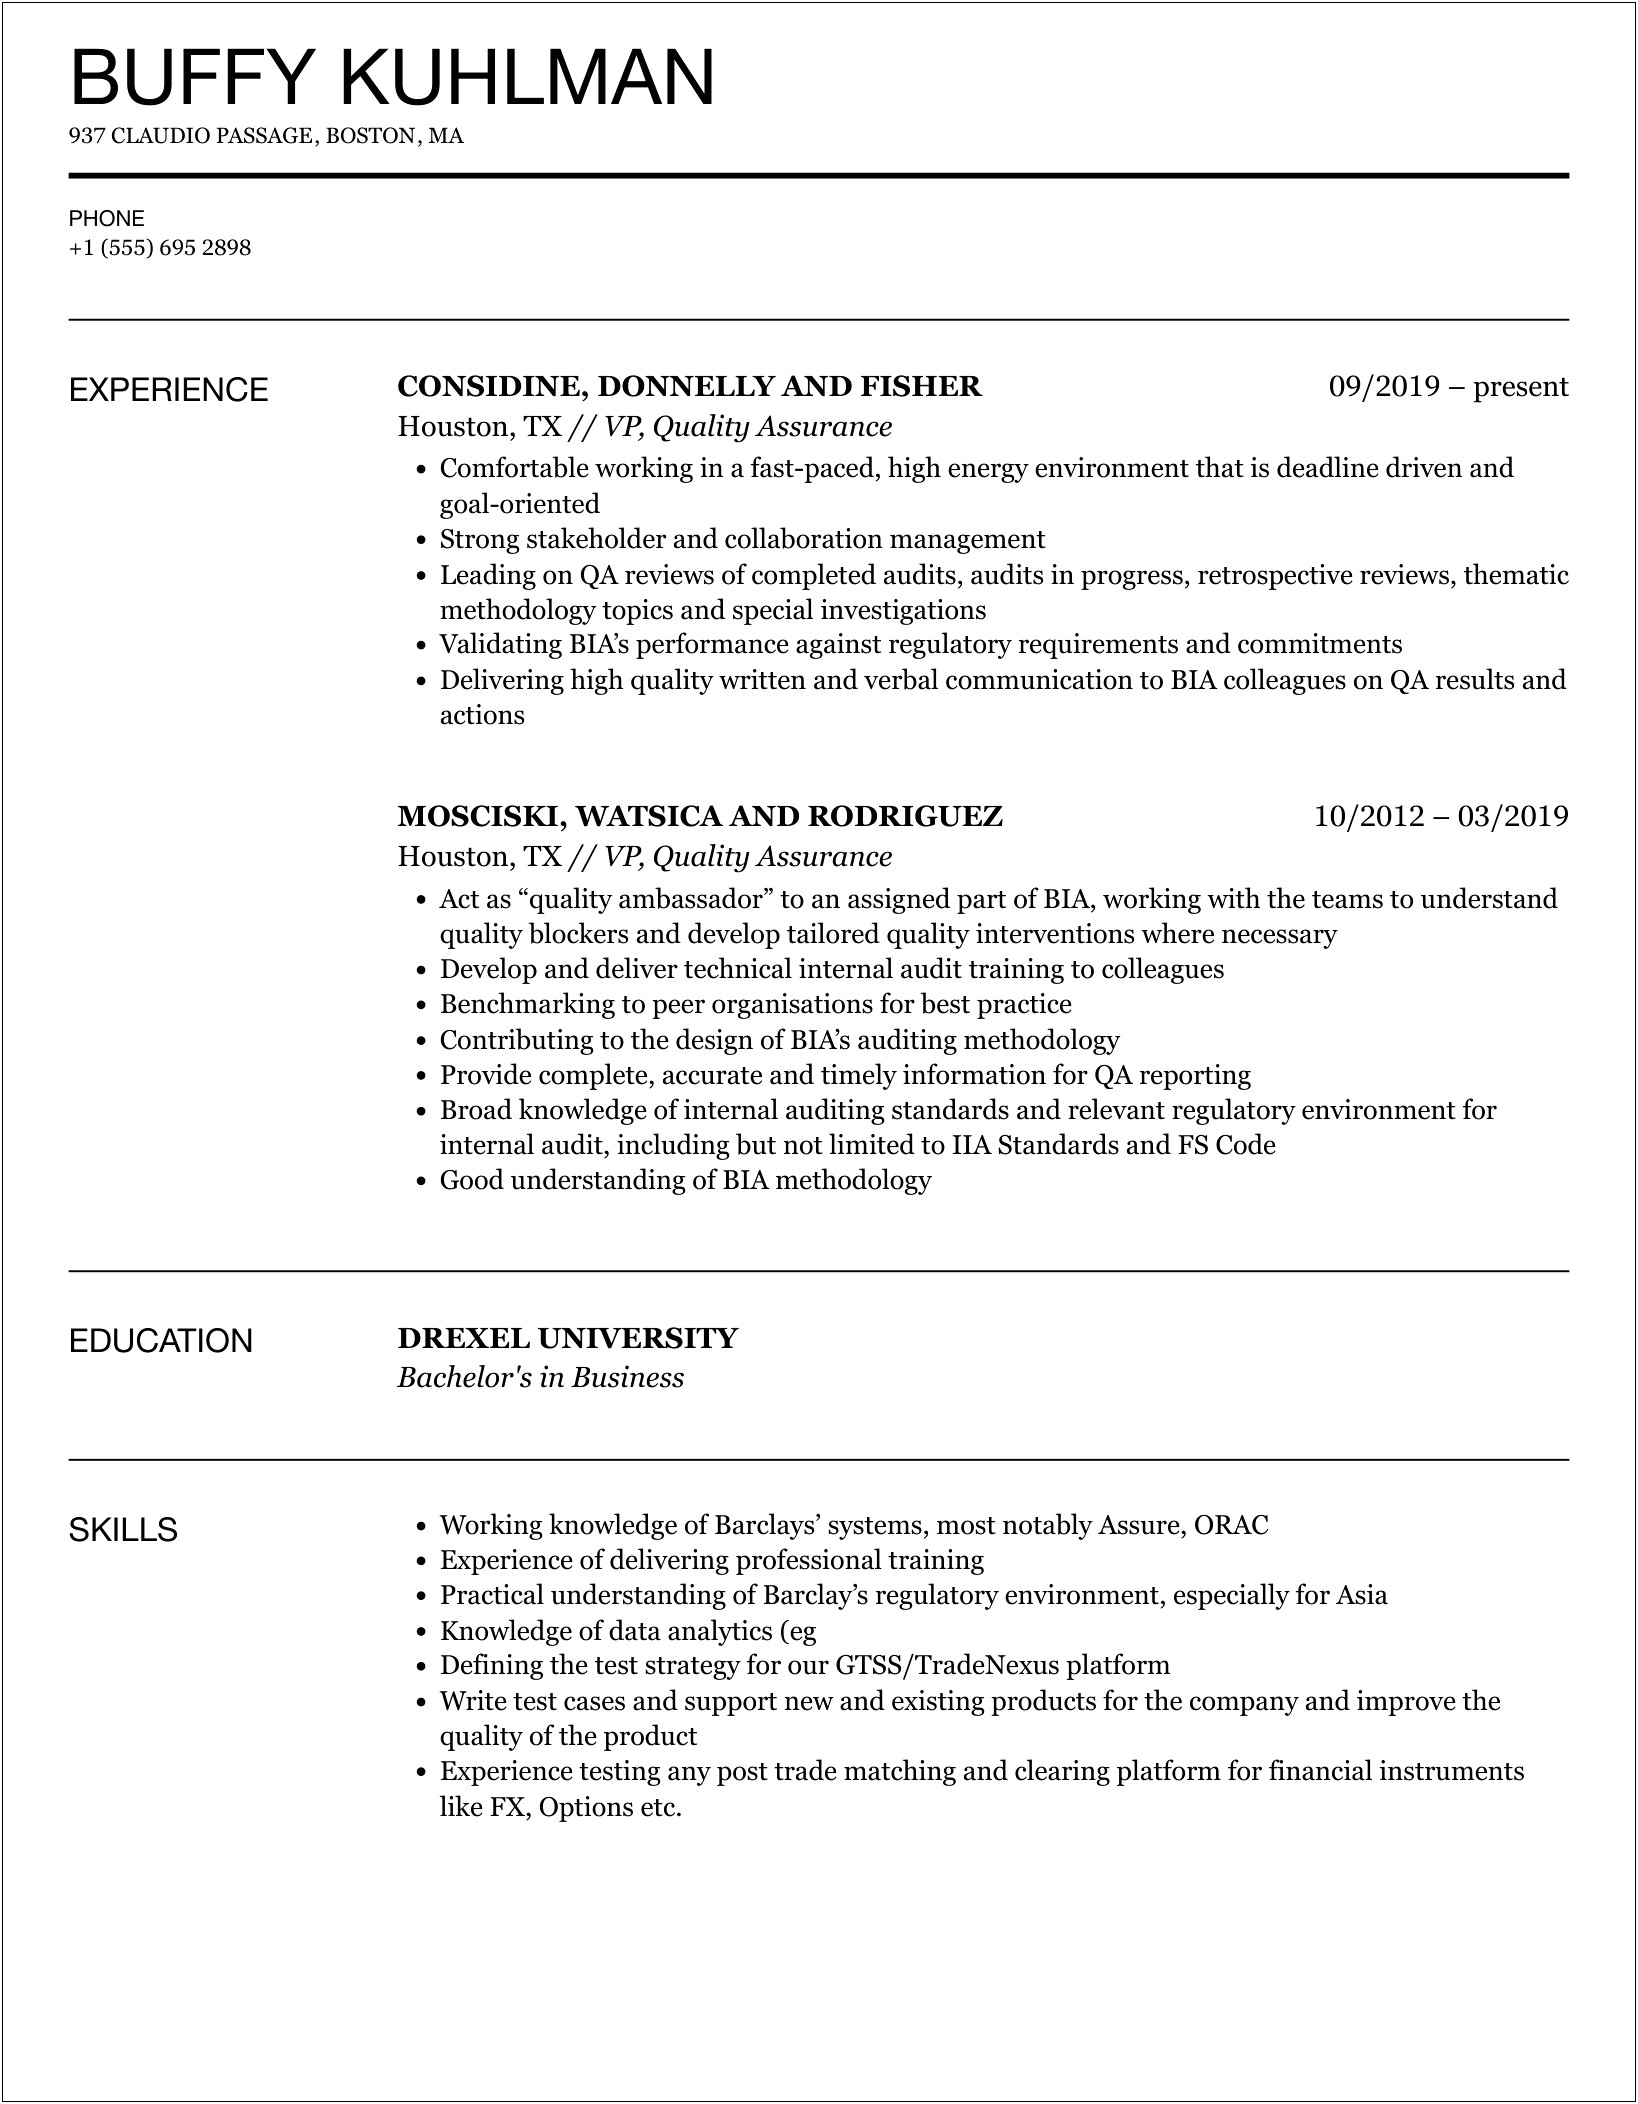 Worked Directly With Vice President Resume